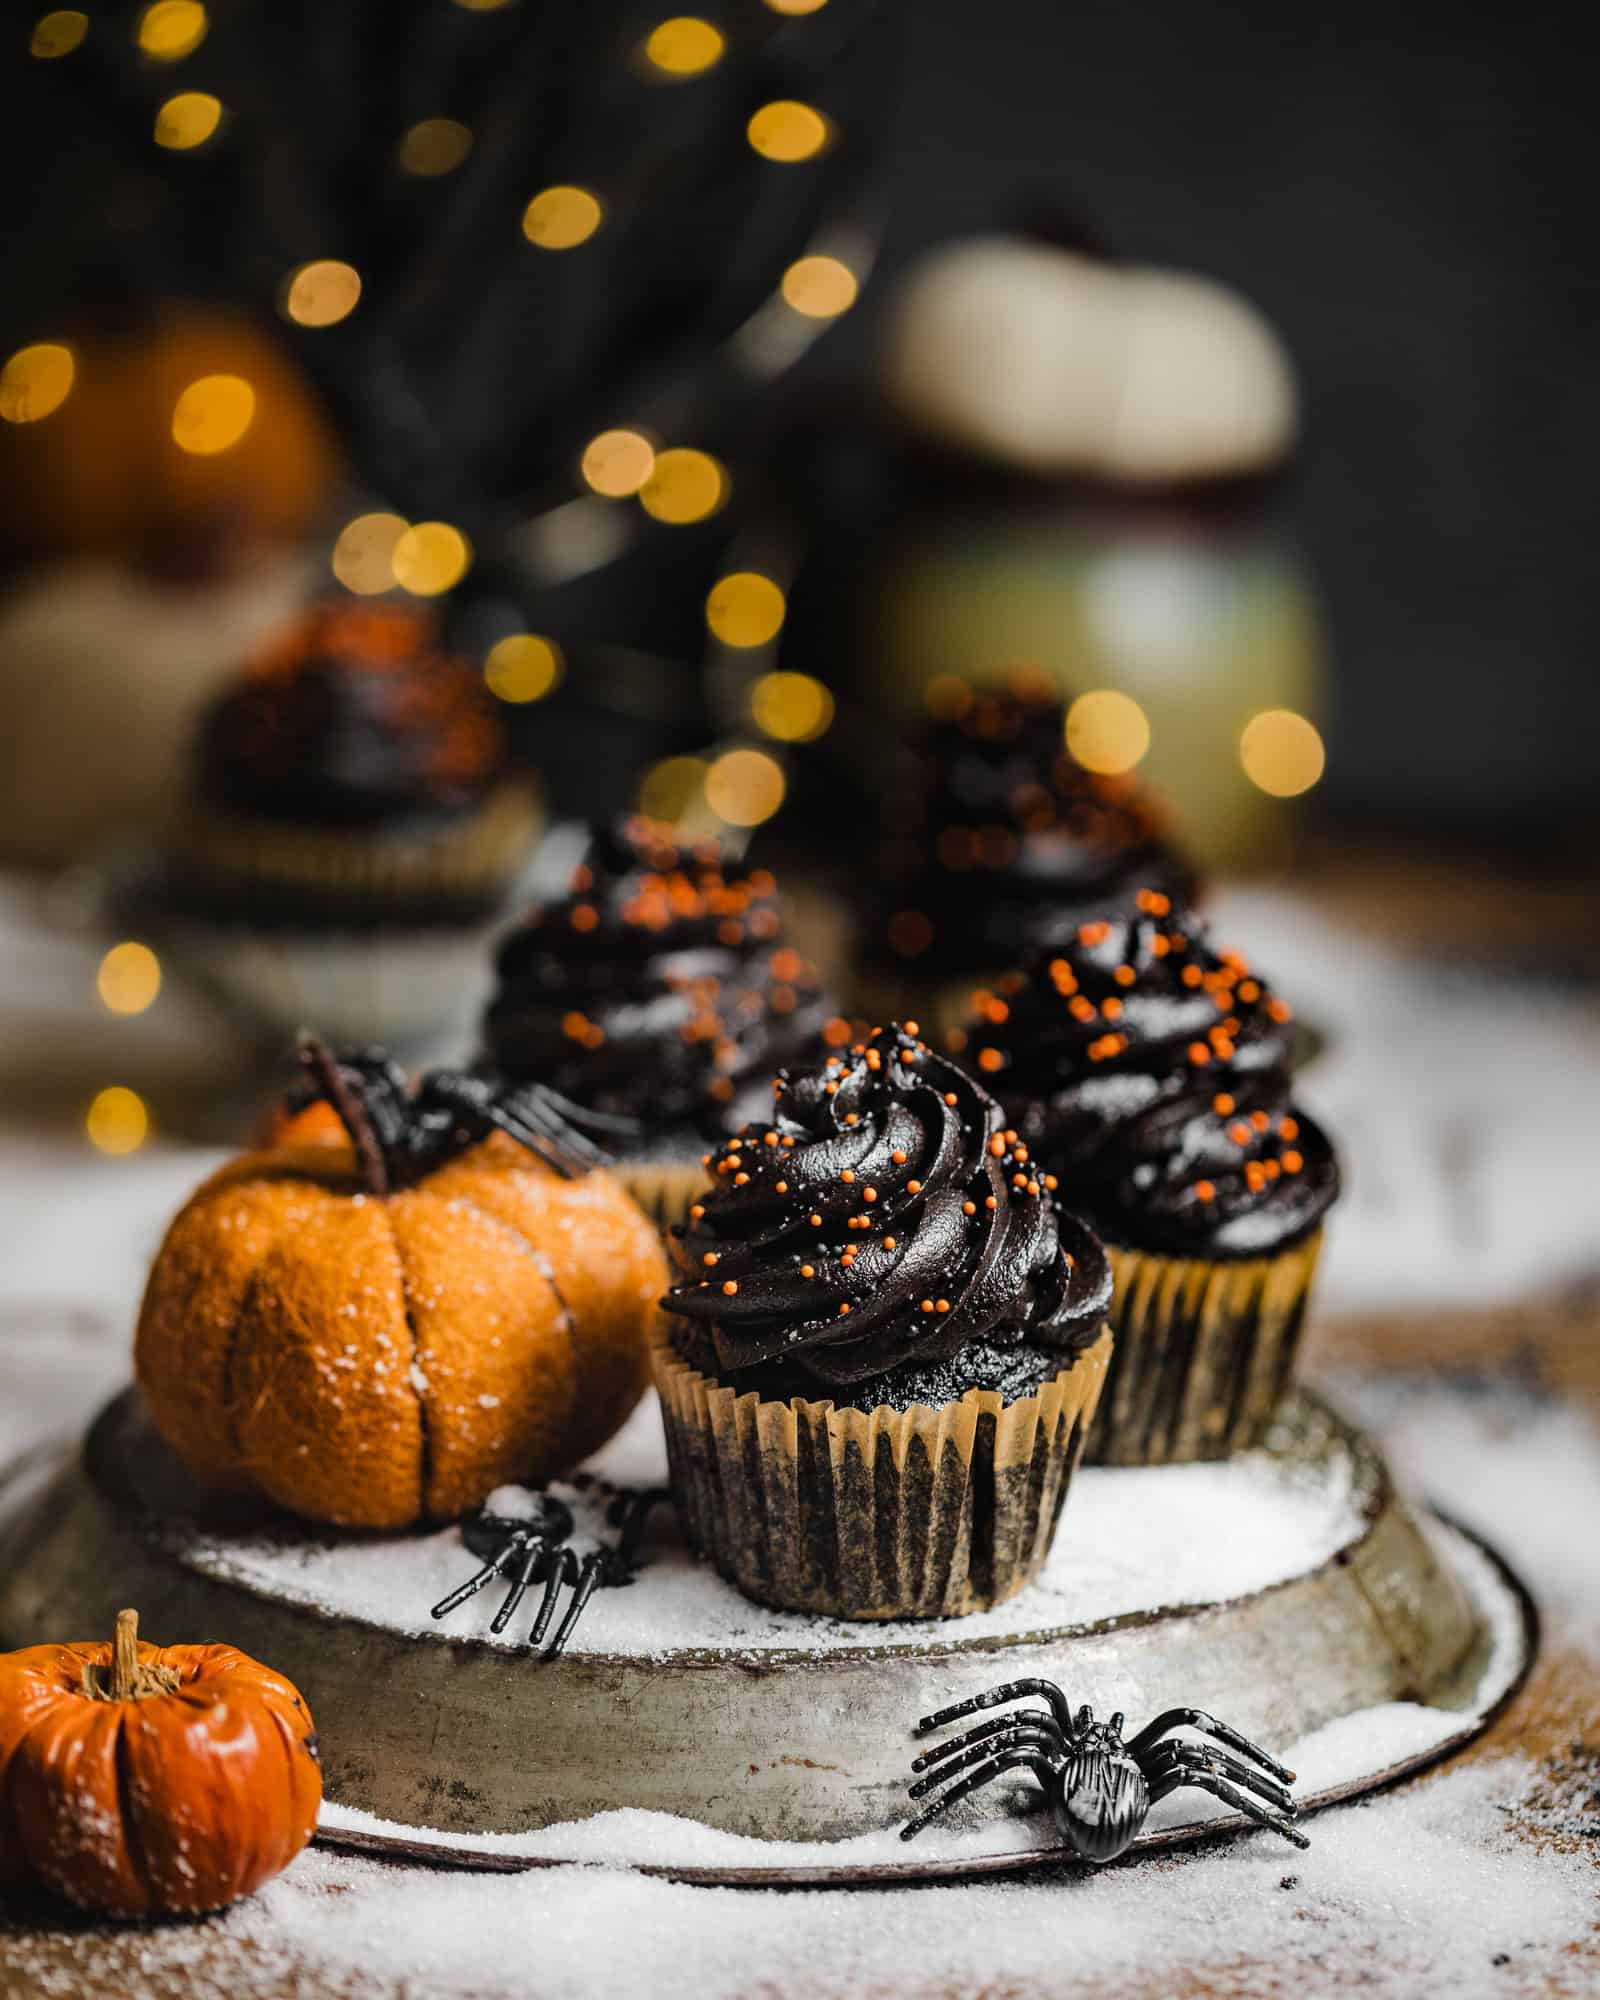 three black velvet cupcakes on a plate with a pumpkin and fake spiders.